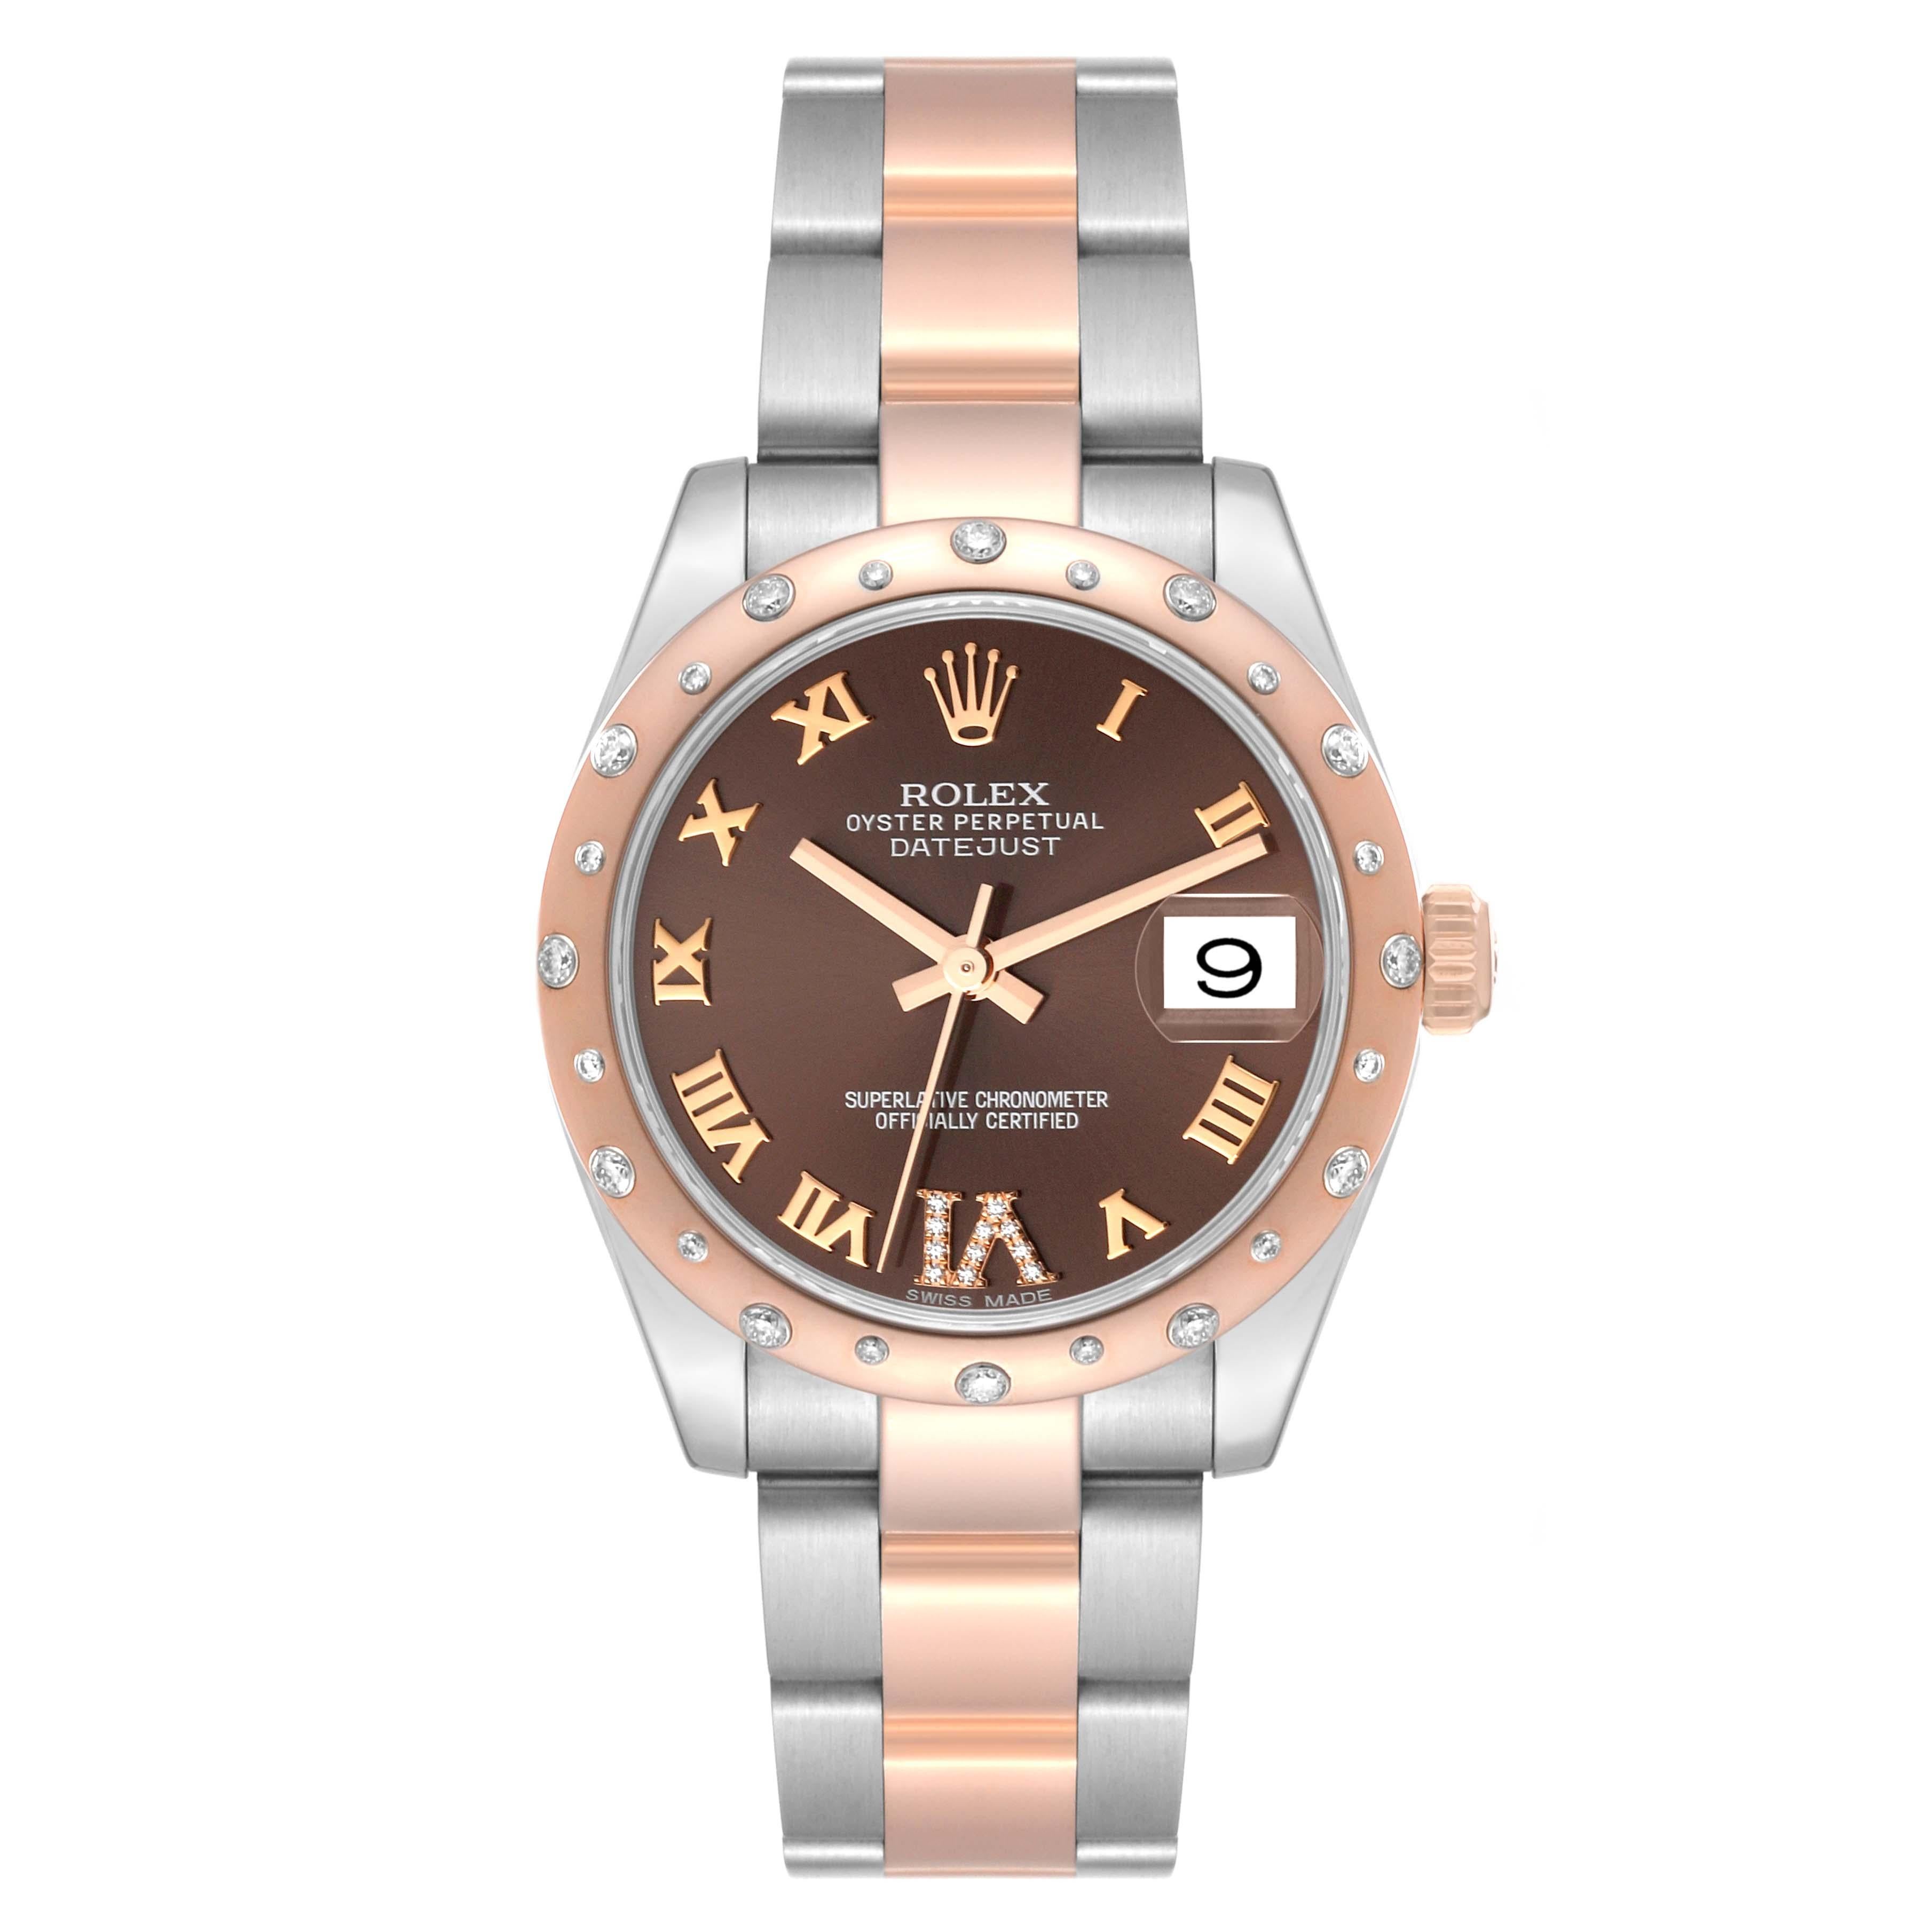 Rolex Datejust Midsize Steel Rose Gold Diamond Ladies Watch 178341 Box Card. Officially certified chronometer automatic self-winding movement with quickset date function. Stainless steel and 18k rose gold oyster case 31 mm in diameter. Rolex logo on